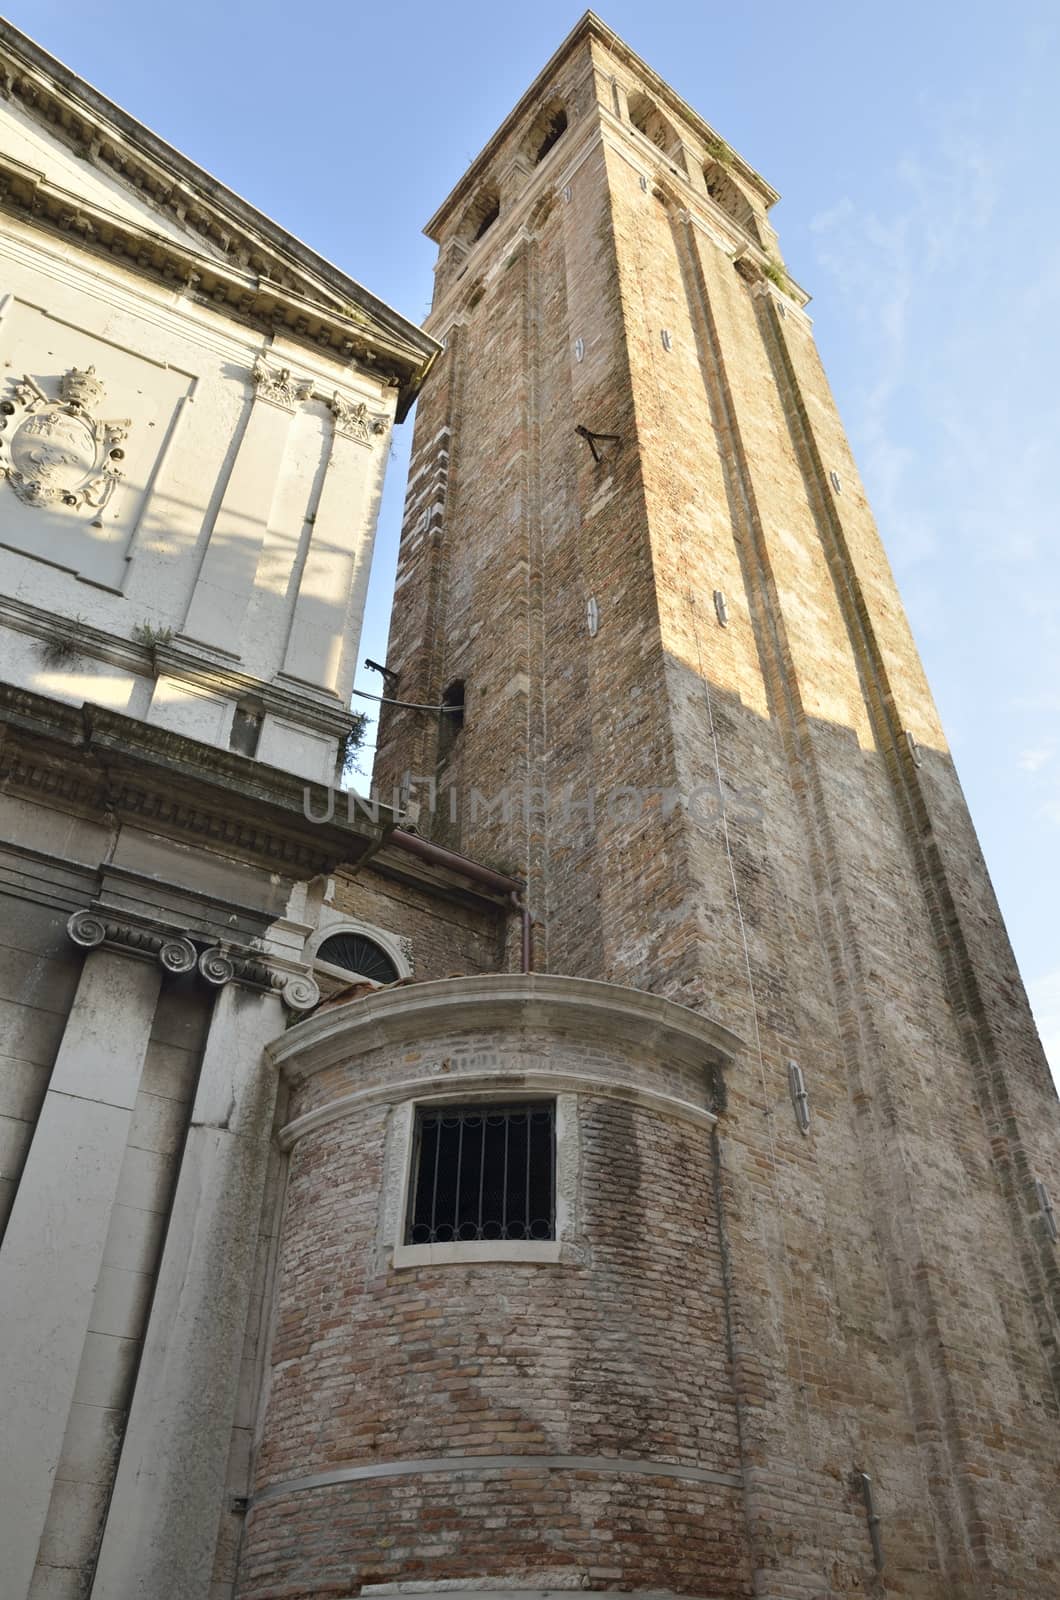 Tower of the Church of Dan Silvestro in Venice, Italy.